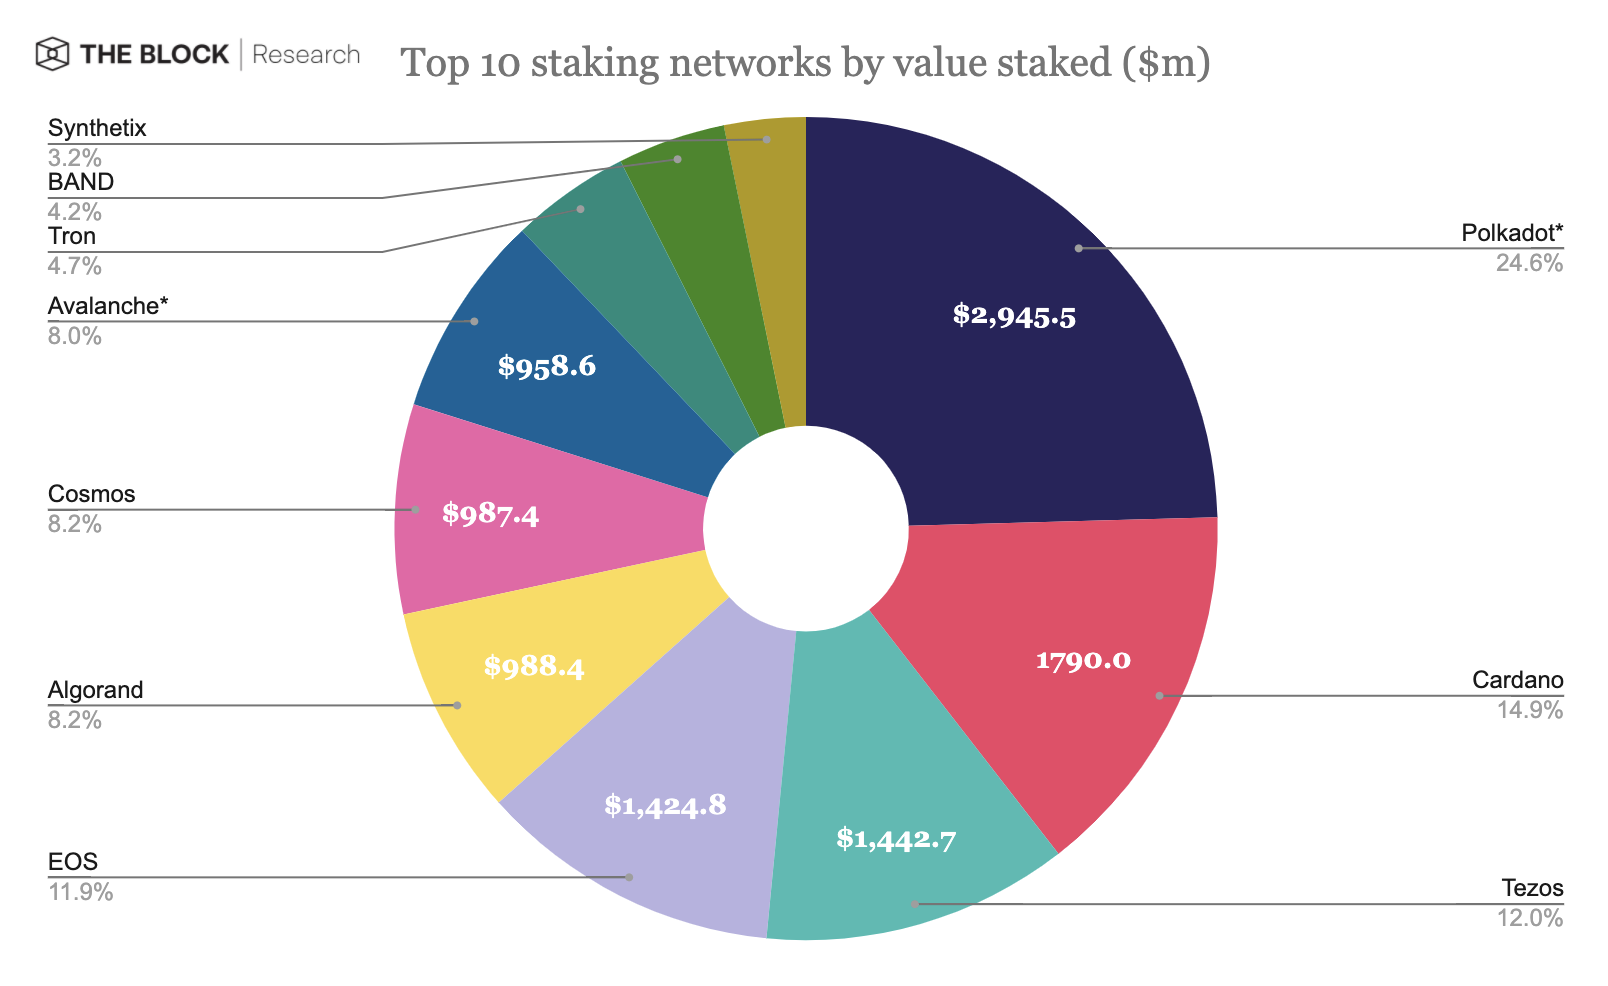 Top 10 staking networks